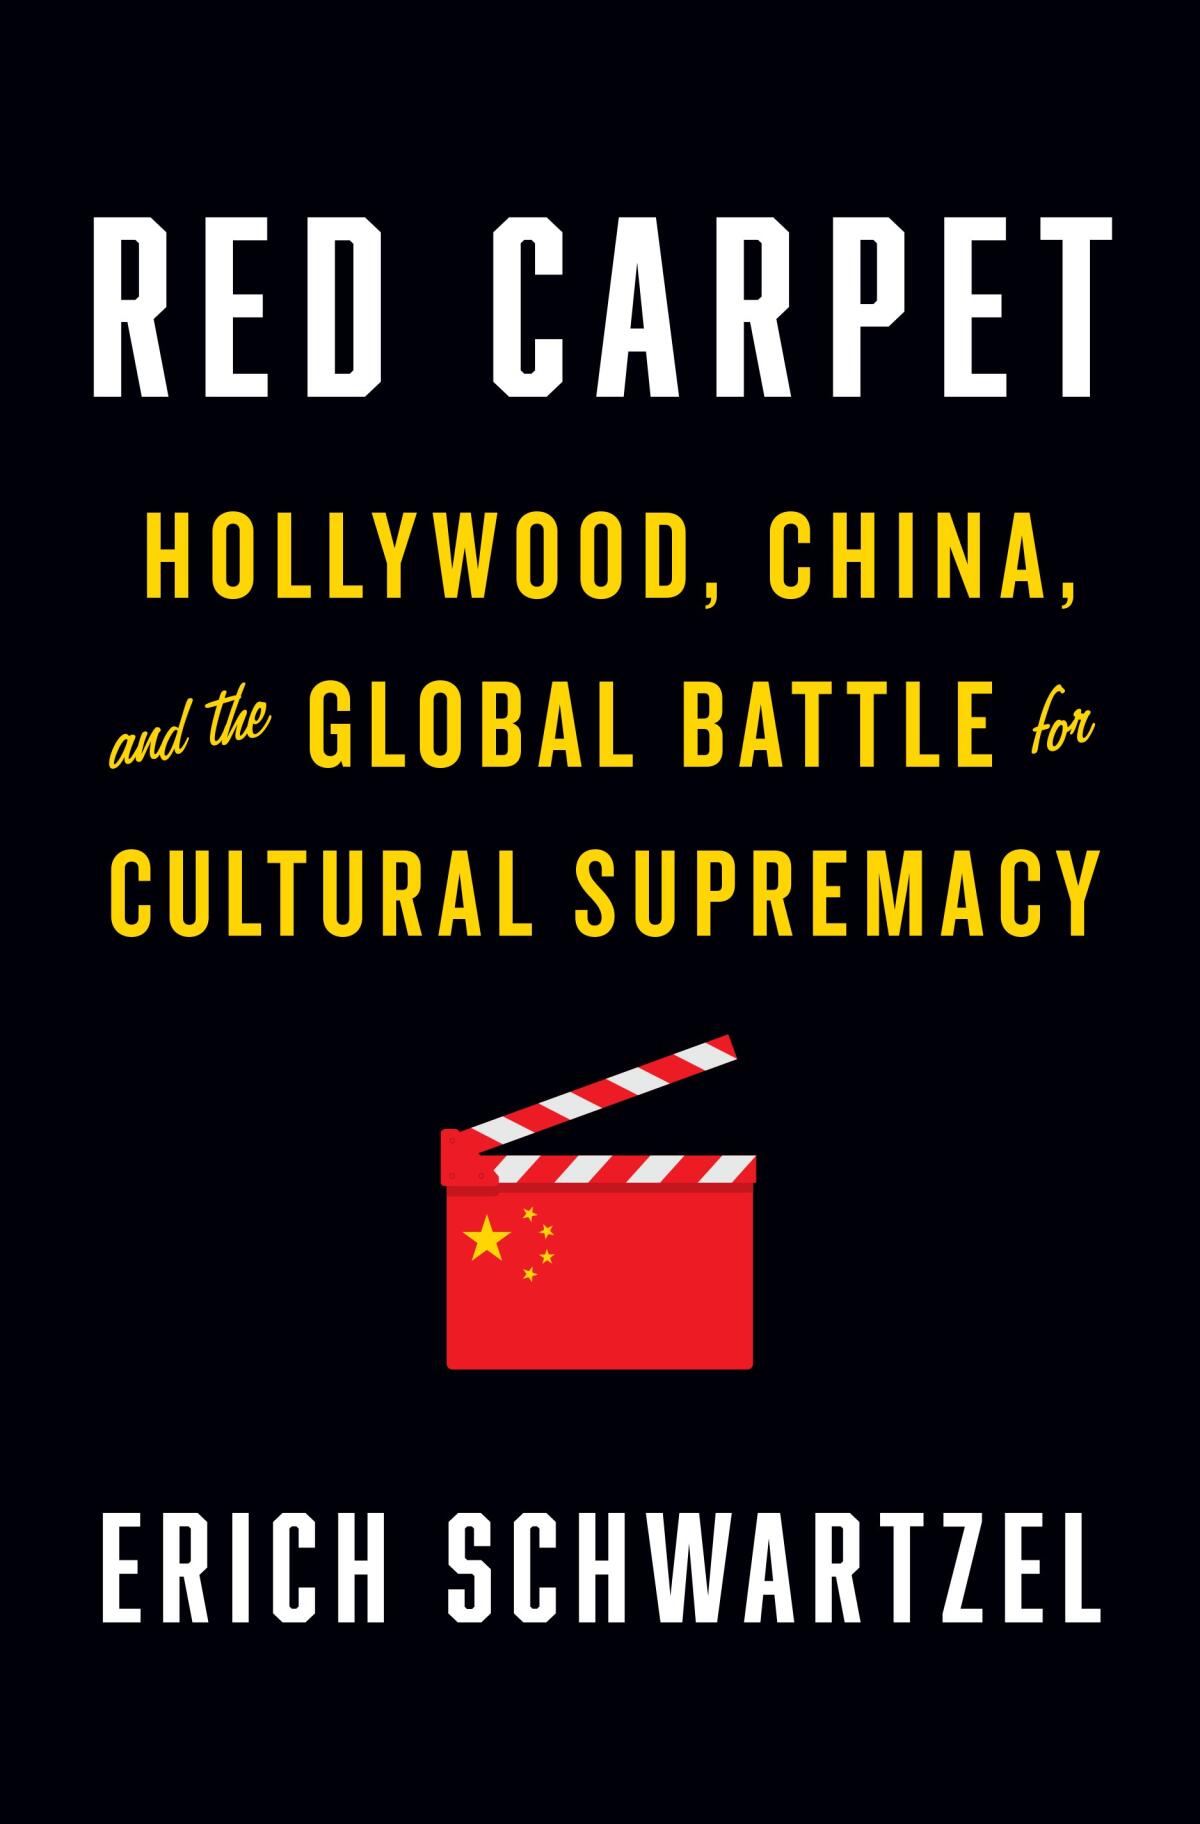 Red Carpet: Hollywood, China, and the Global Battle for Cultural Supremacy," by Erich Schwartzel